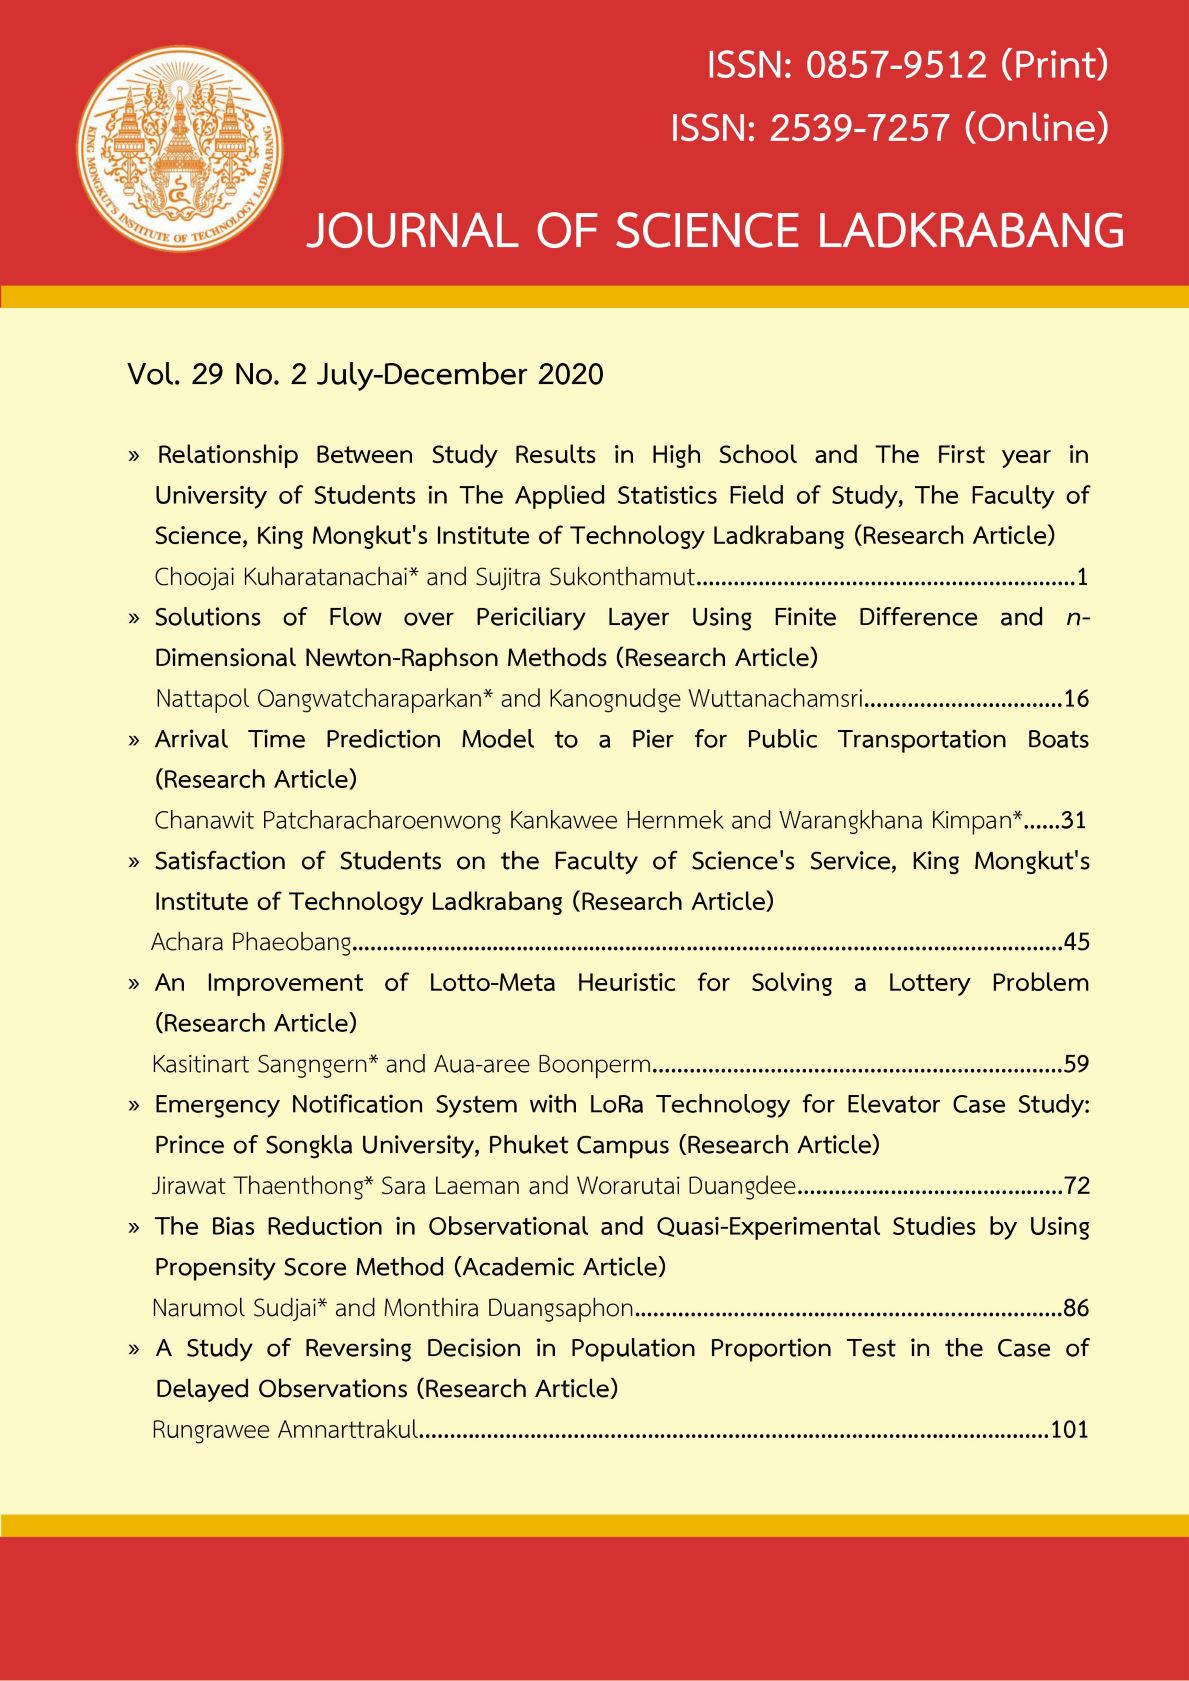 Image cover page Journal of Science Ladkrabang, Vol. 29 No. 2, July-December 2020